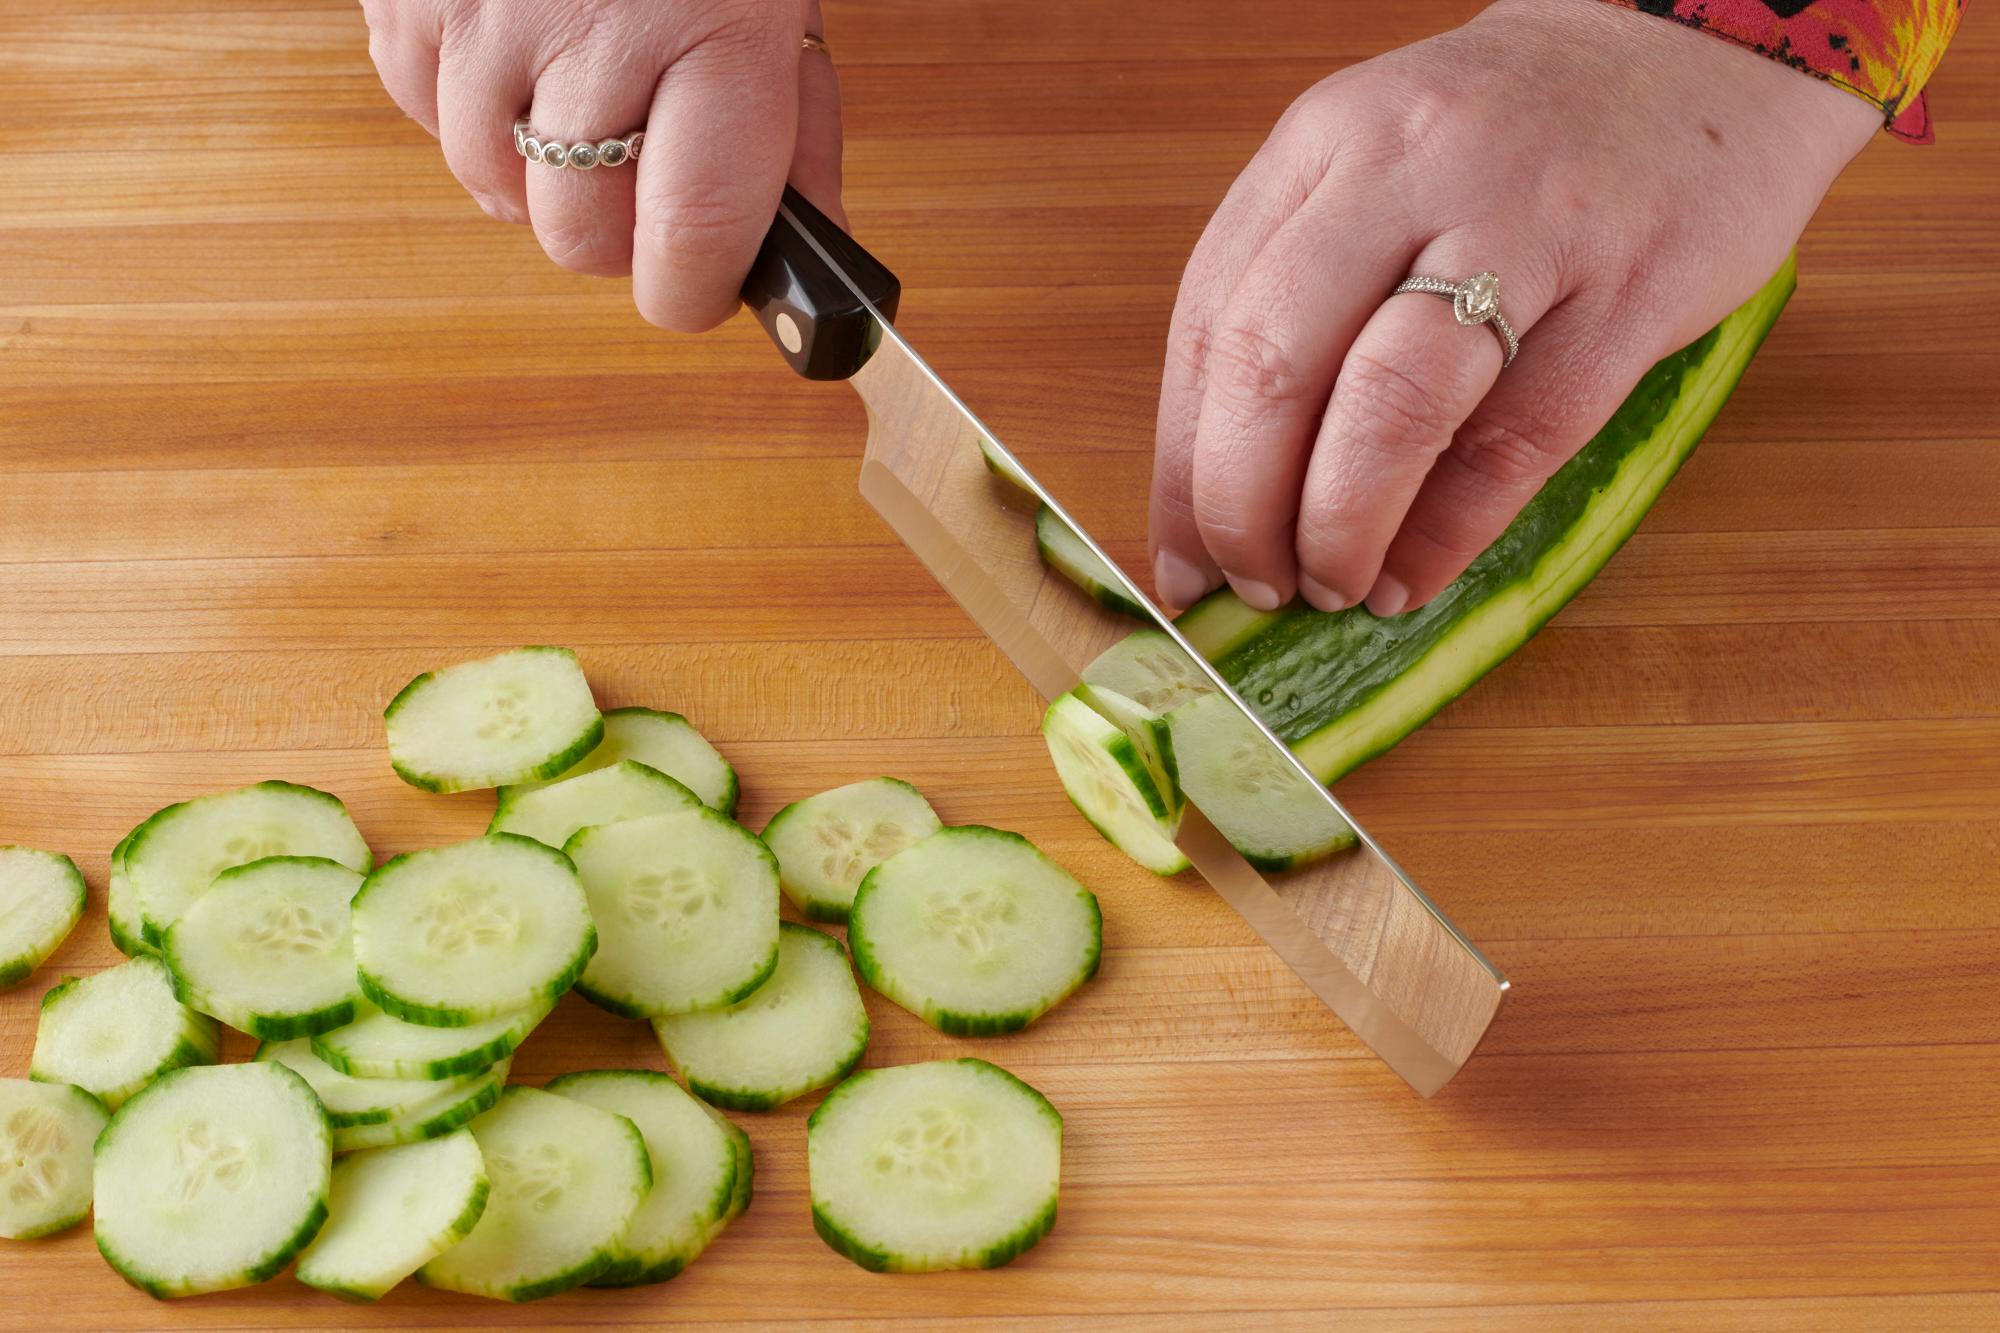 Cutting cucumber with a 6 Inch Vegetable Knife.